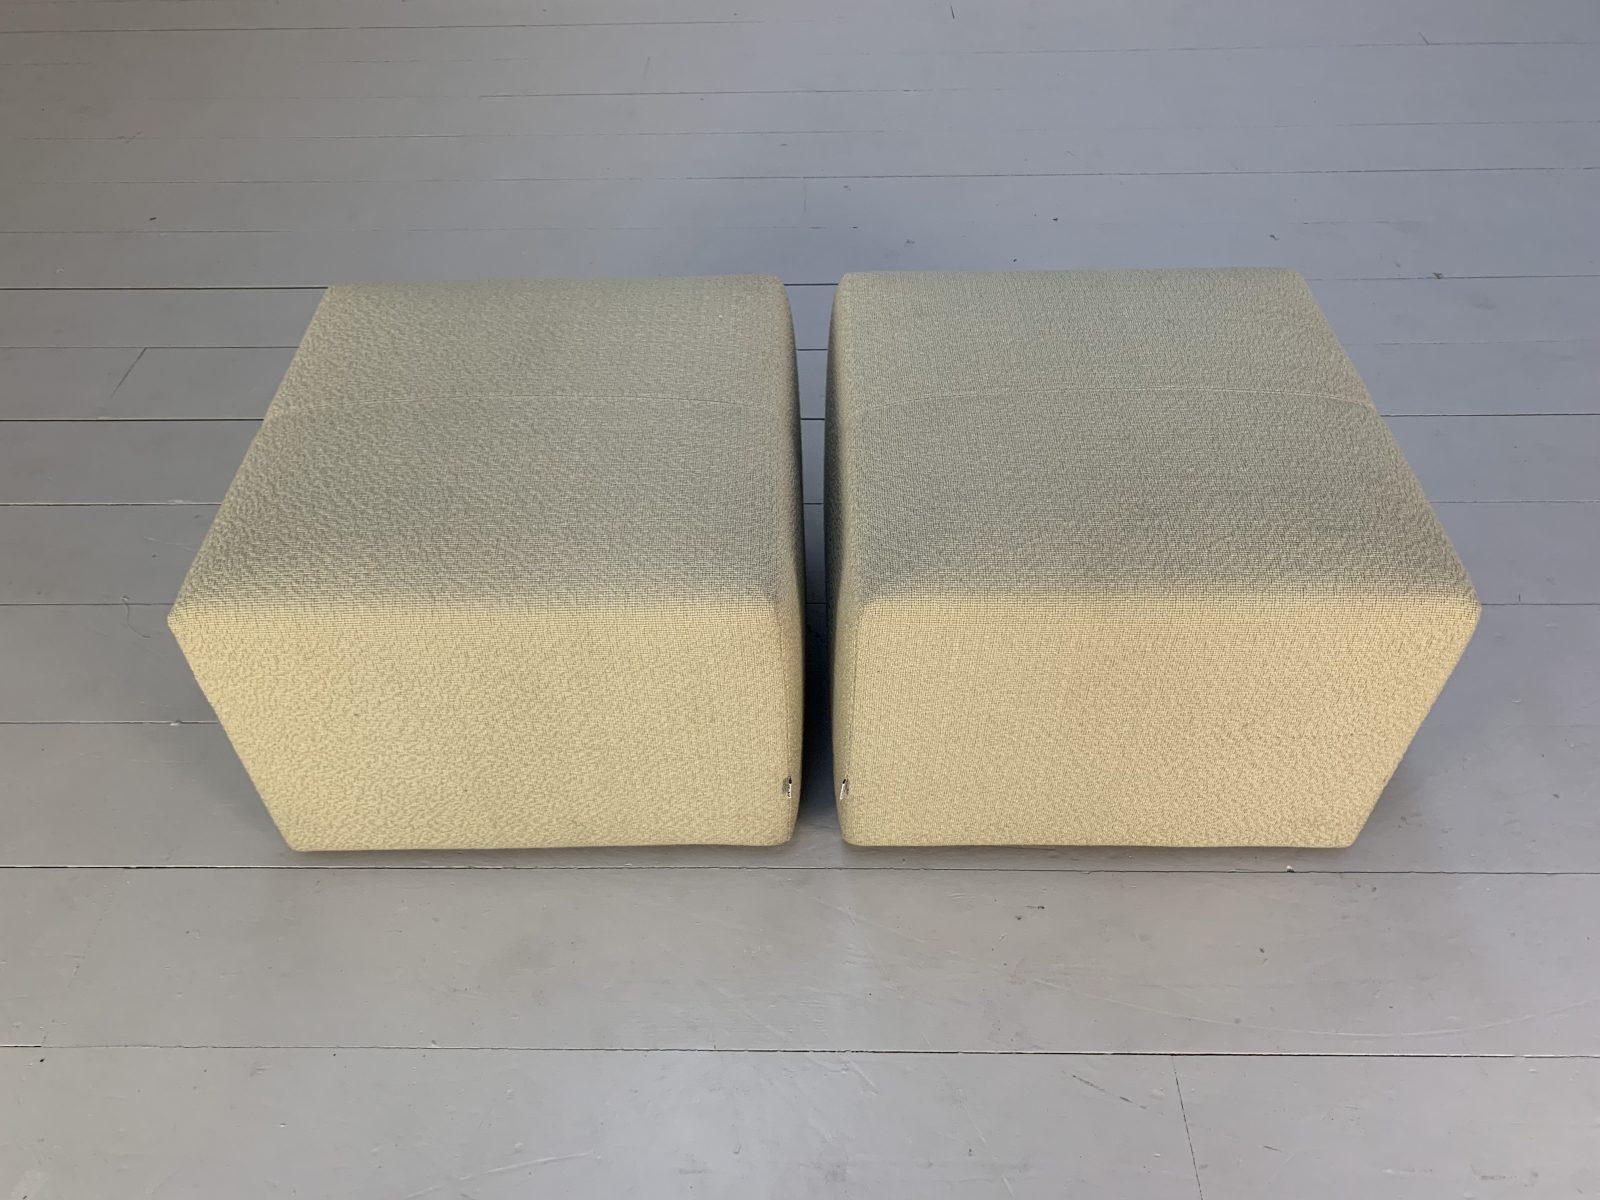 Pair Of B&B Italia “Charles” Footstools – In Ivory Boucle In Good Condition For Sale In Barrowford, GB